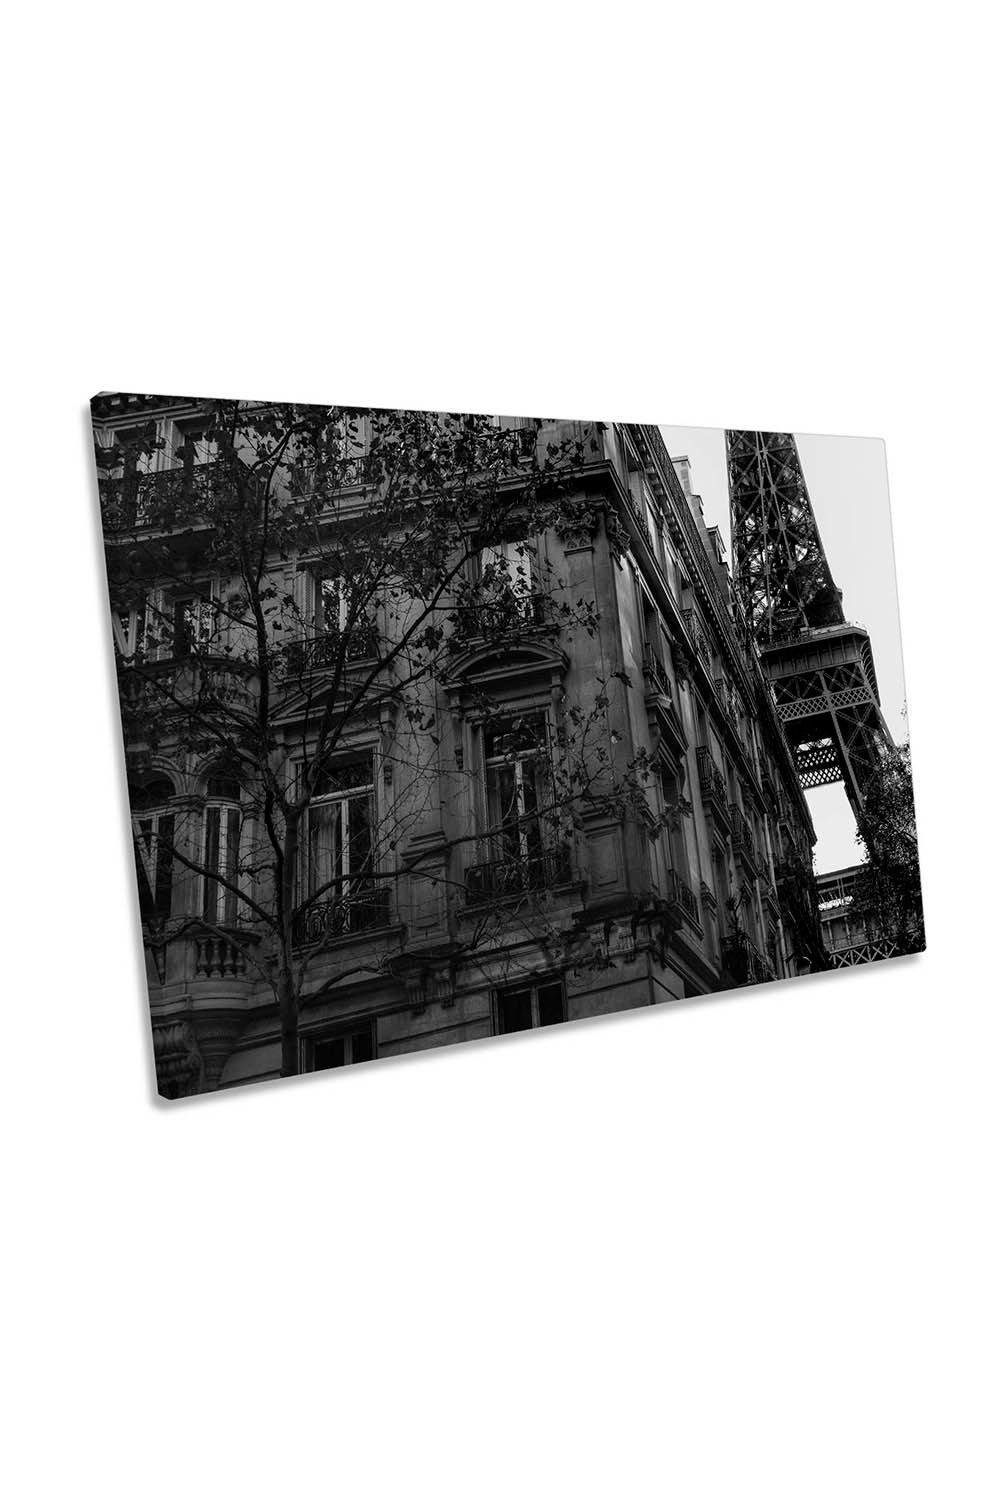 Eiffel Tower Mother of Paris City Canvas Wall Art Picture Print